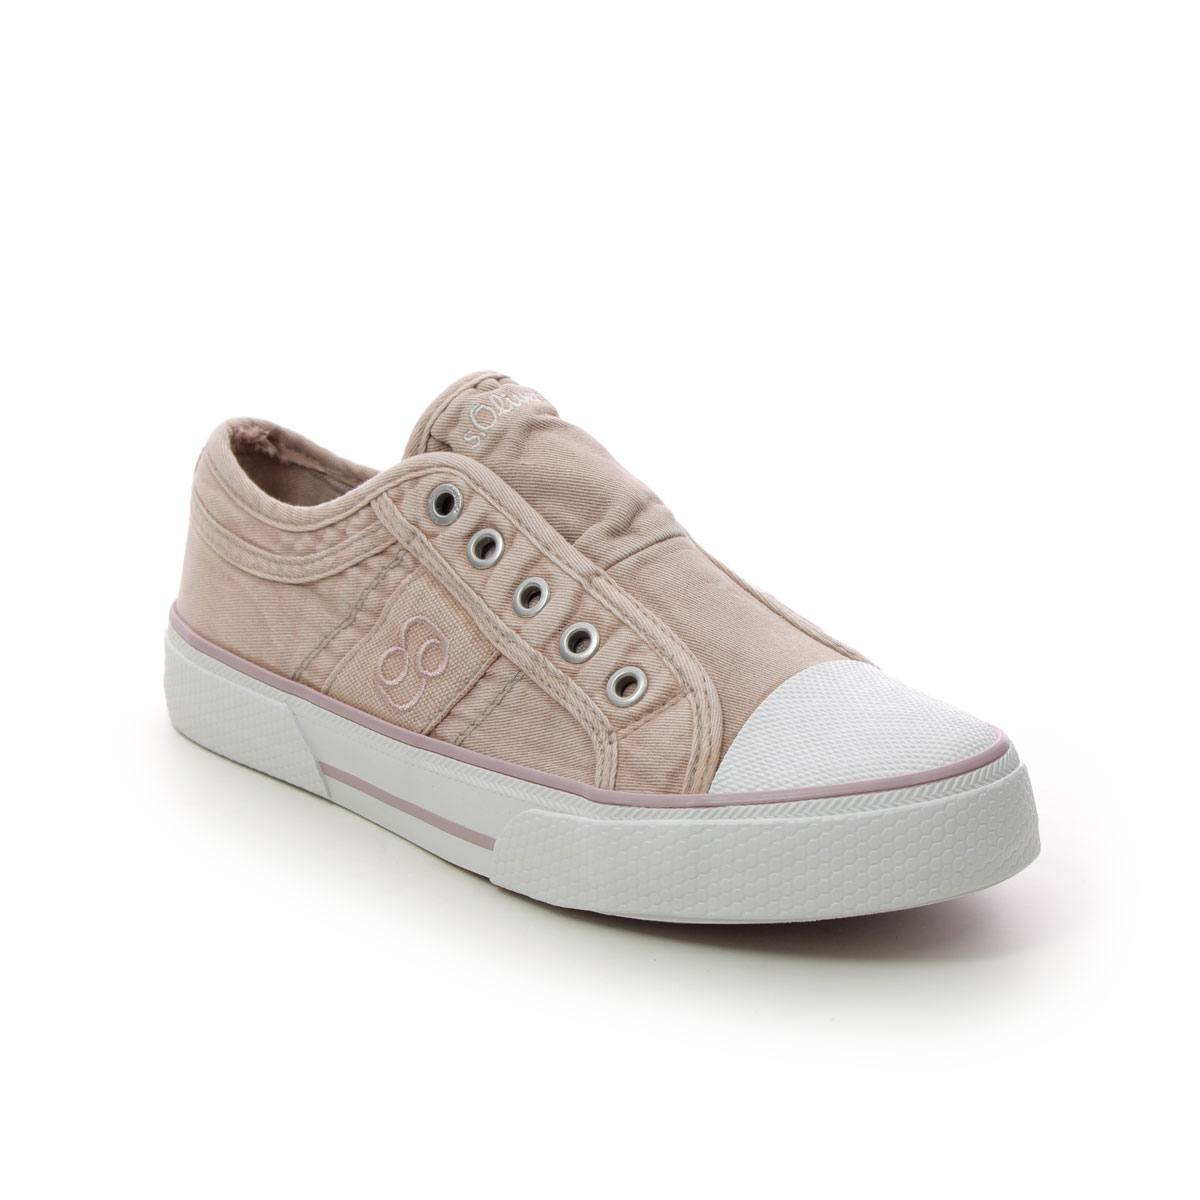 S Oliver Mustang 31 Rose pink Womens trainers 24635-30544